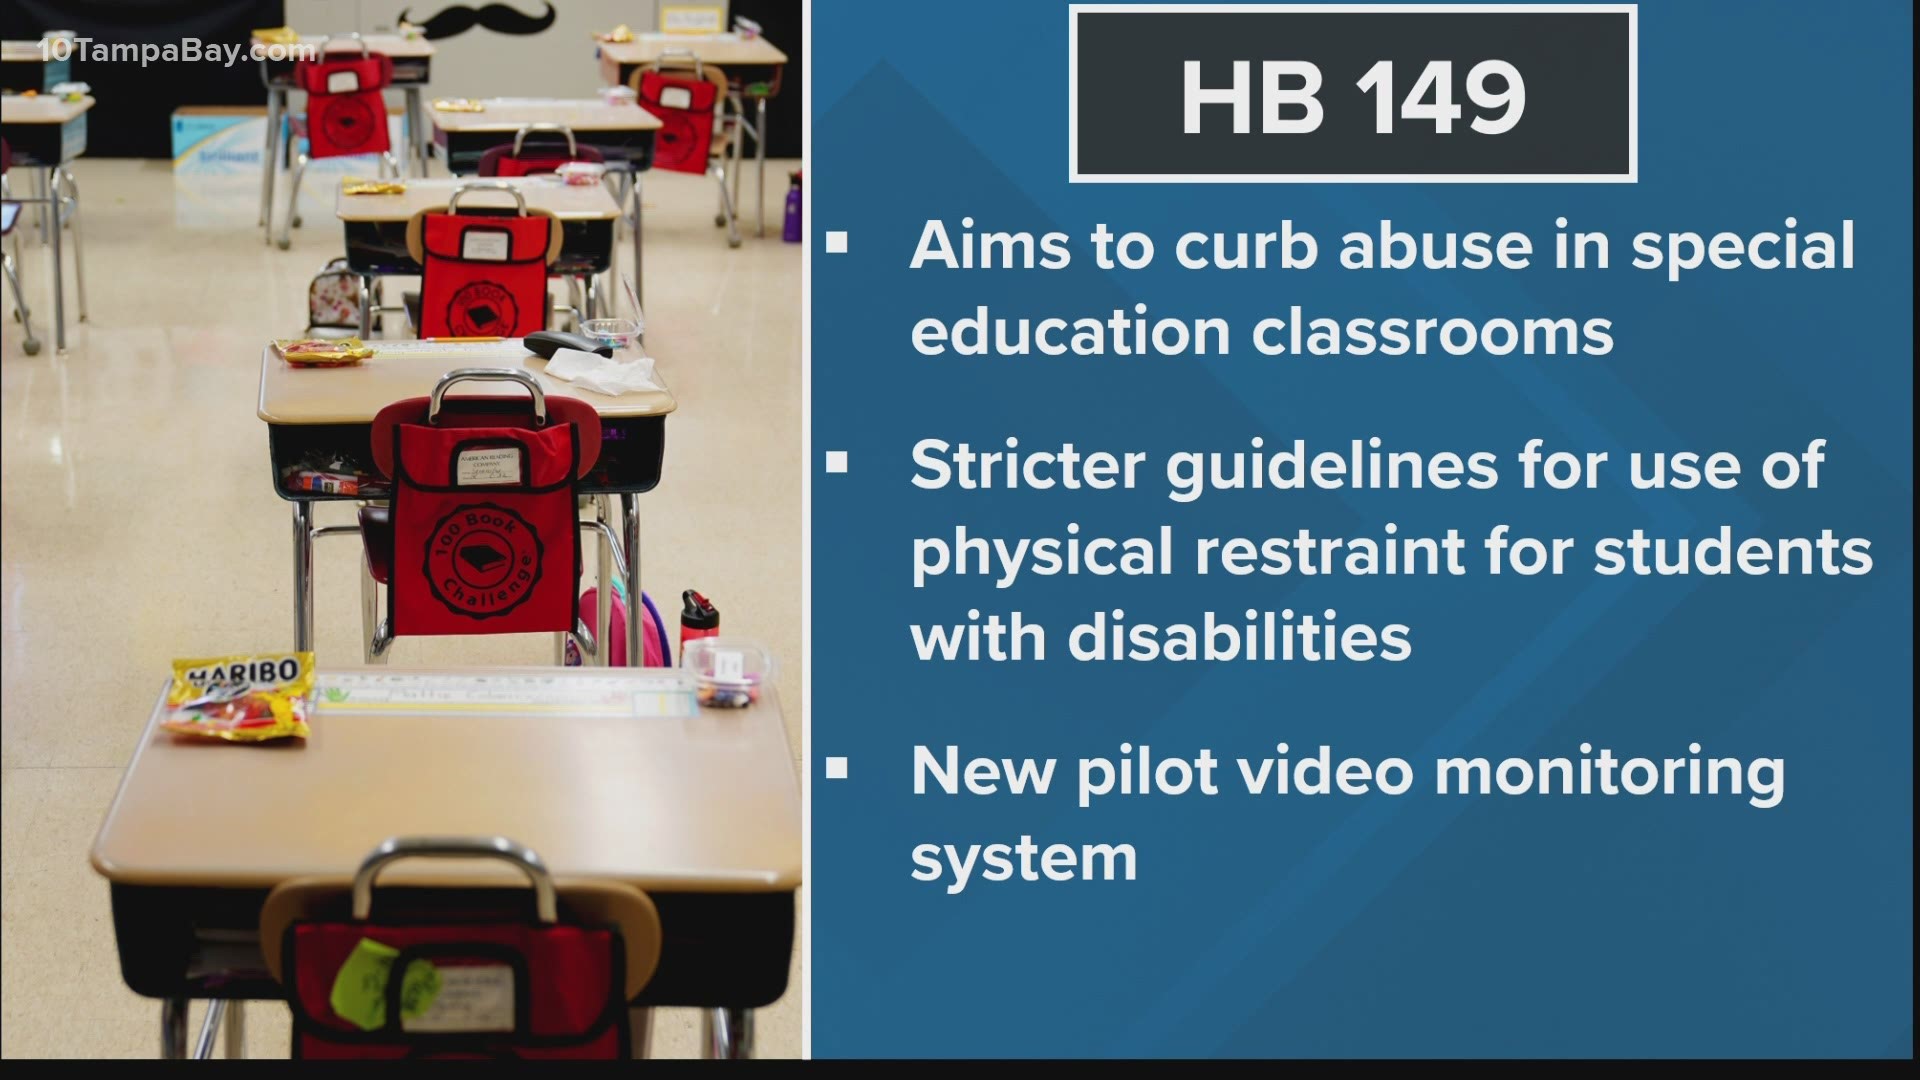 The bill prohibits the use of seclusion on students and requires stricter guidelines for the use of physical restraint.